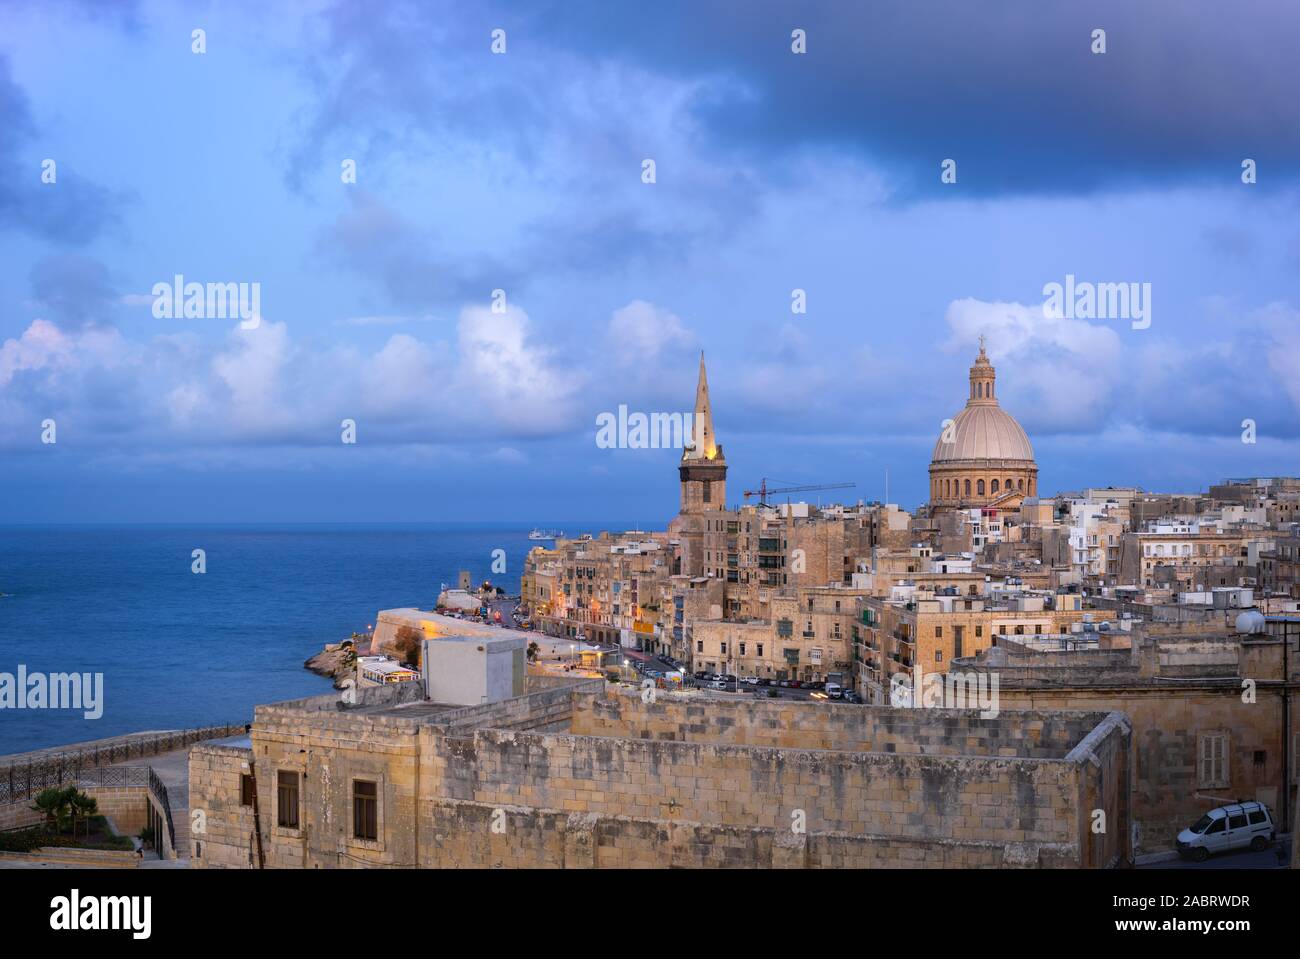 Skyline of Valletta at sunset with Basilica and St. Paul's Anglican Cathedral. Malta Stock Photo